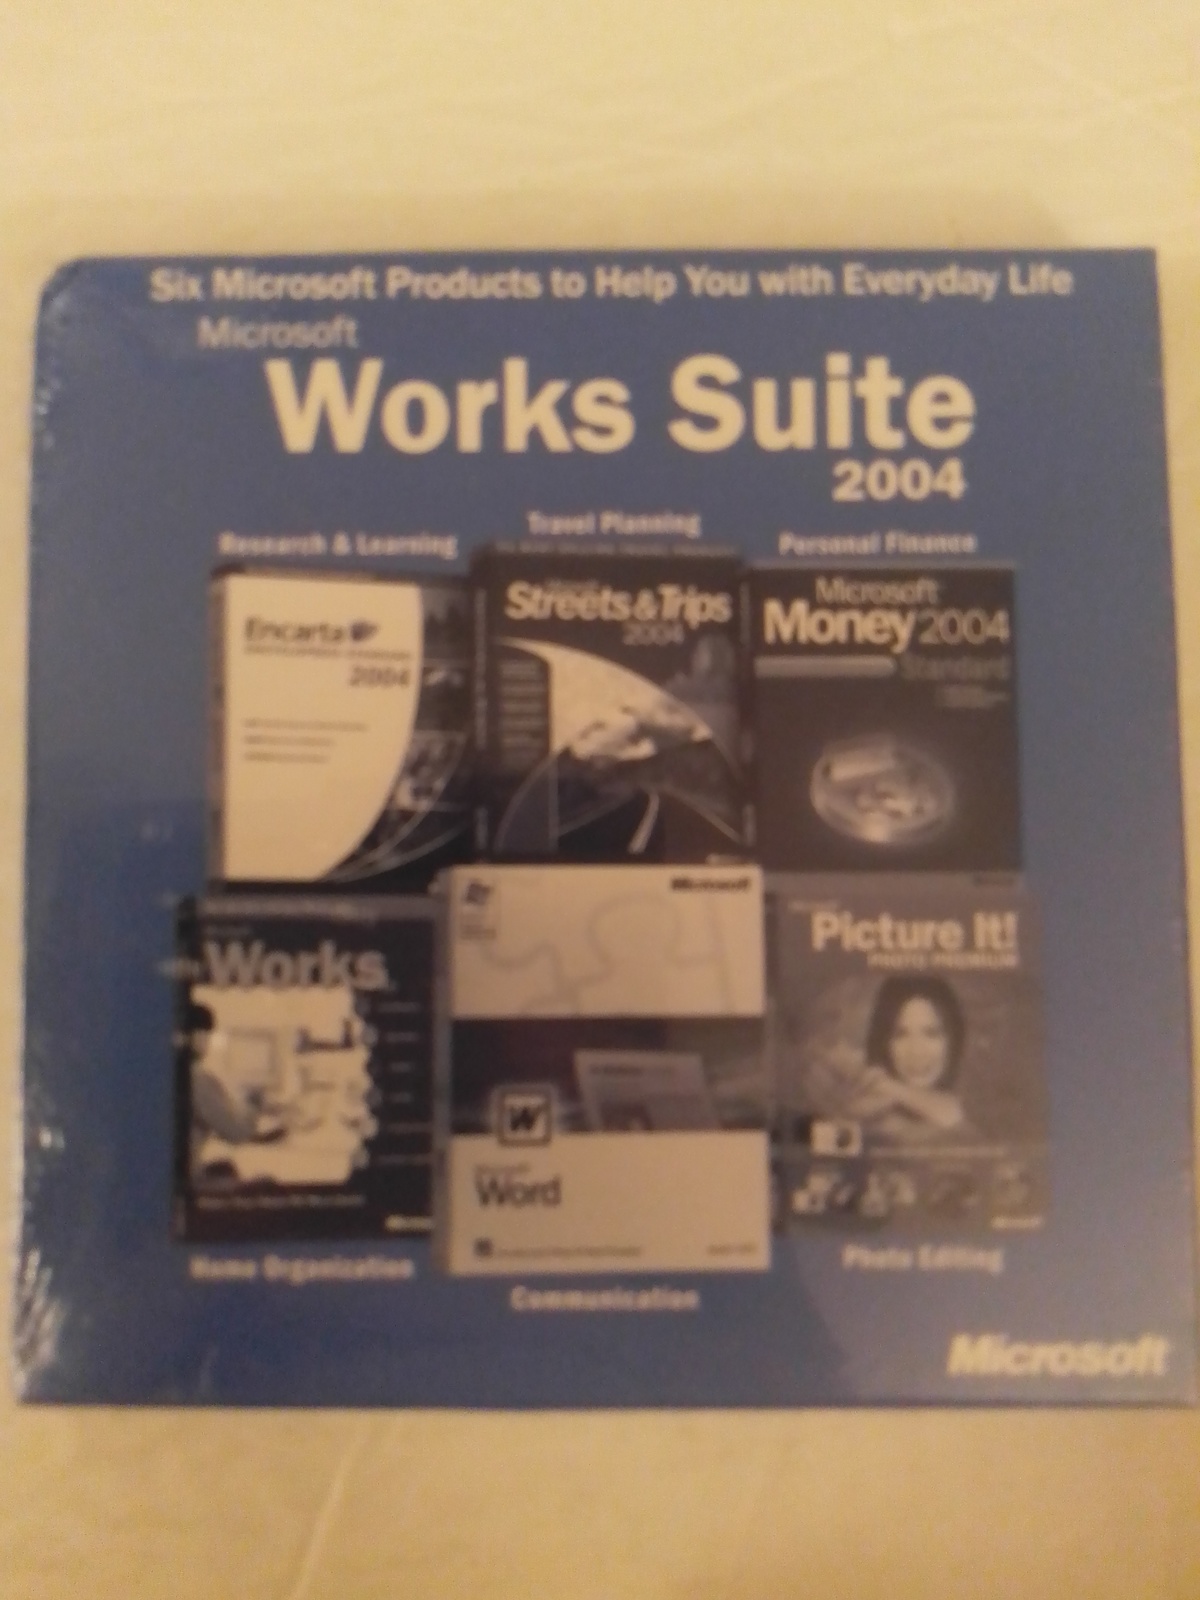 Primary image for Microsoft Works Suite 2004 CD-ROM Set Brand New Factory Sealed With Word Key